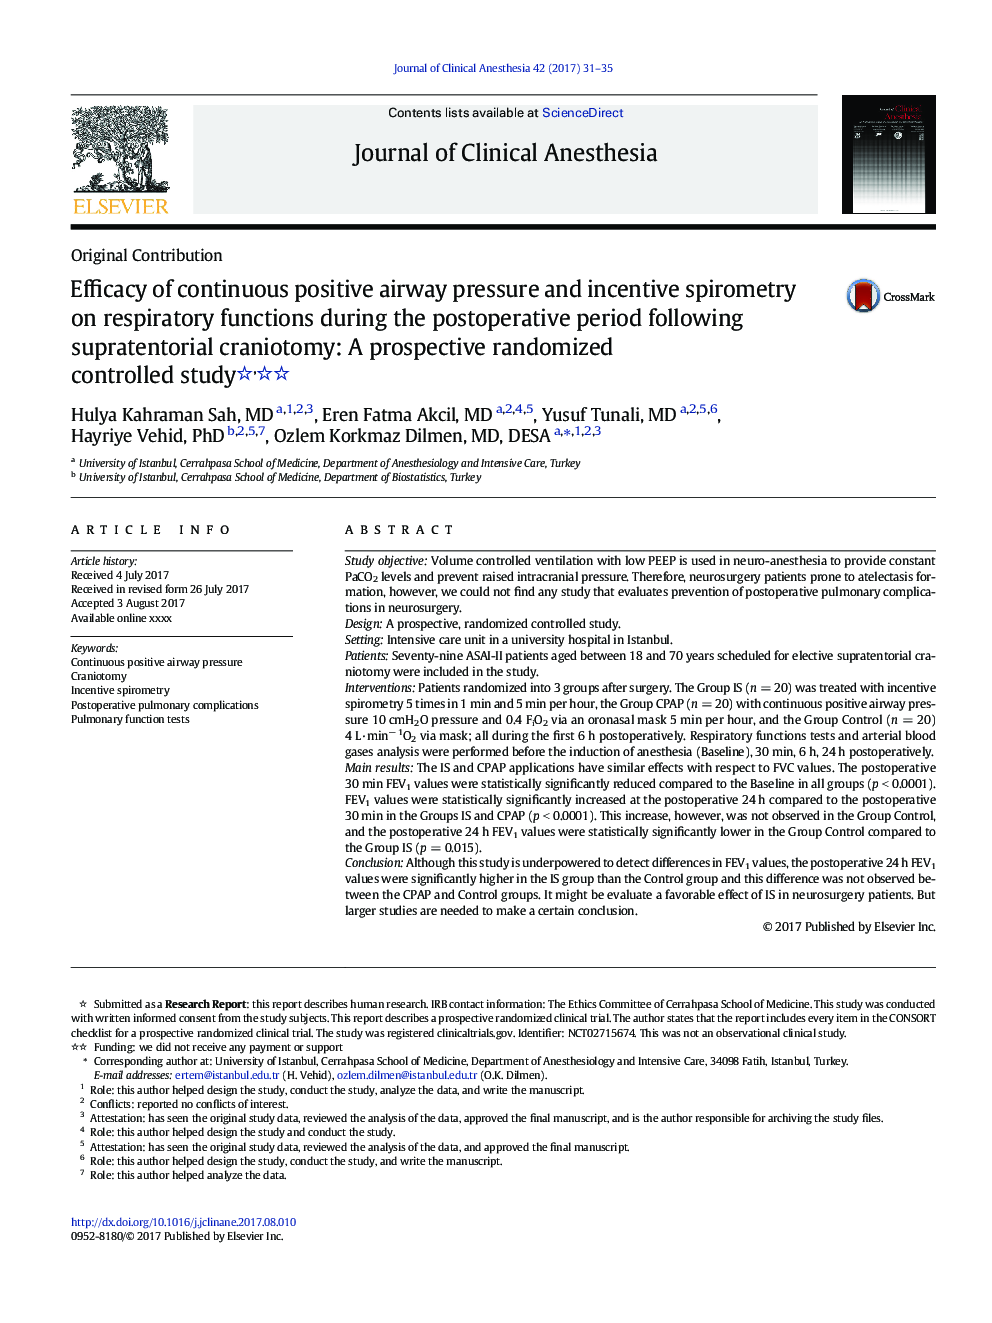 Efficacy of continuous positive airway pressure and incentive spirometry on respiratory functions during the postoperative period following supratentorial craniotomy: A prospective randomized controlled study